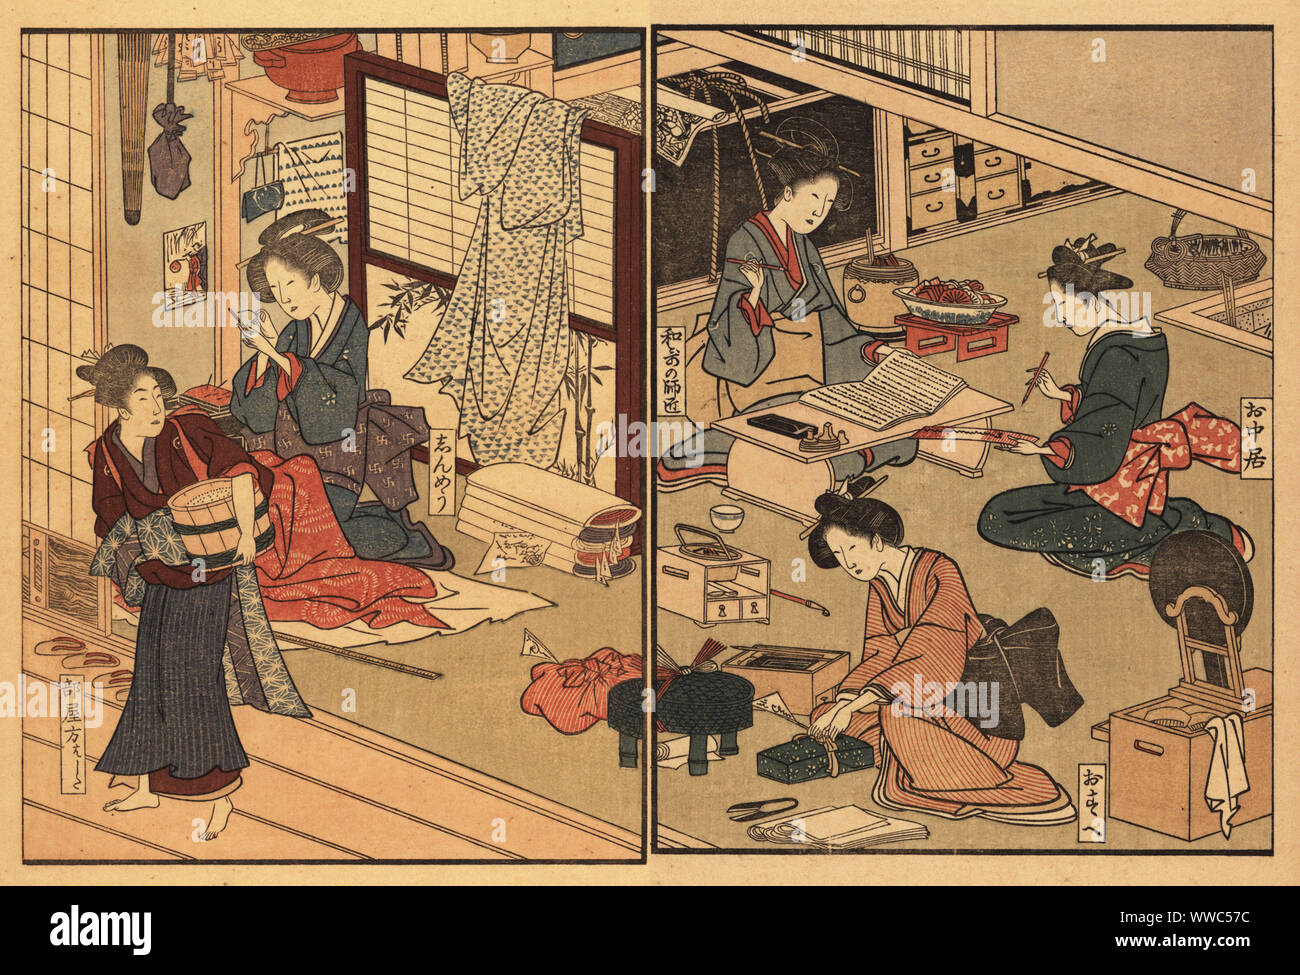 Women of the merchant or artisan class. Waka poetry tutor in a daimyo’s house. Servants sewing, writing poems, wrapping items and carrying rice. The tatami floor of the room is covered with folded kimono, tobacco pipes, boxes, mirror and hairdressing items, etc. Handcoloured ukiyo-e woodblock print by Toyokuni Utagawa from Shikitei Sanba’s Ehon Imayo Sugata (Picture Book of the Modern Forms and Figures, Tokyo, 1916. Reprint of the original from 1802. Stock Photo